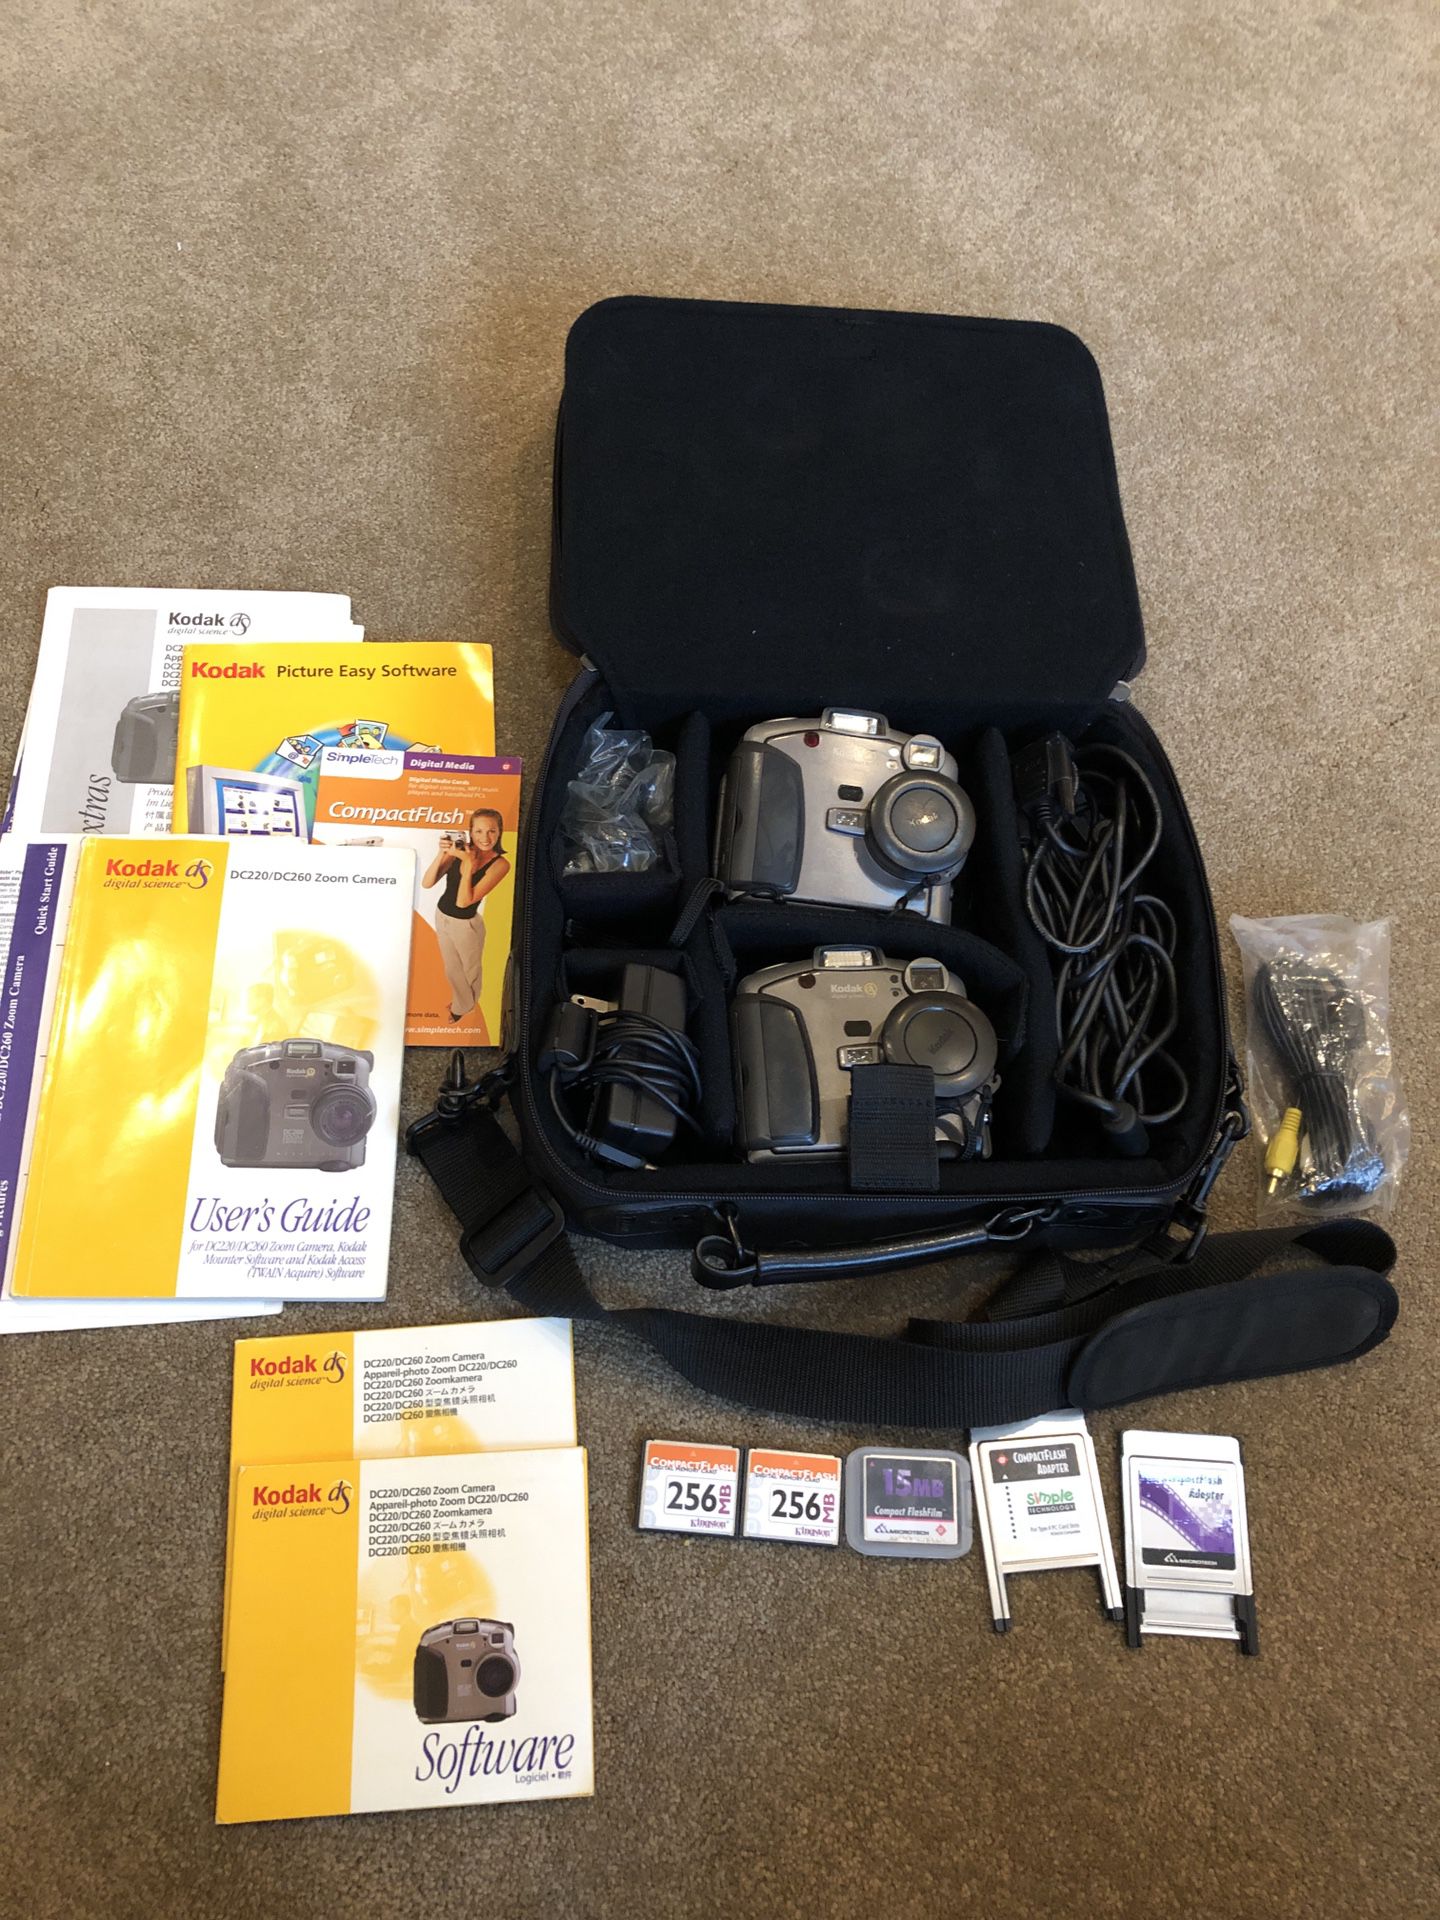 Lot Of 2 Kodak DC260 Zoom Cameras w/ Case & 3 Compact Flash Cards (2-256, 15 MB)